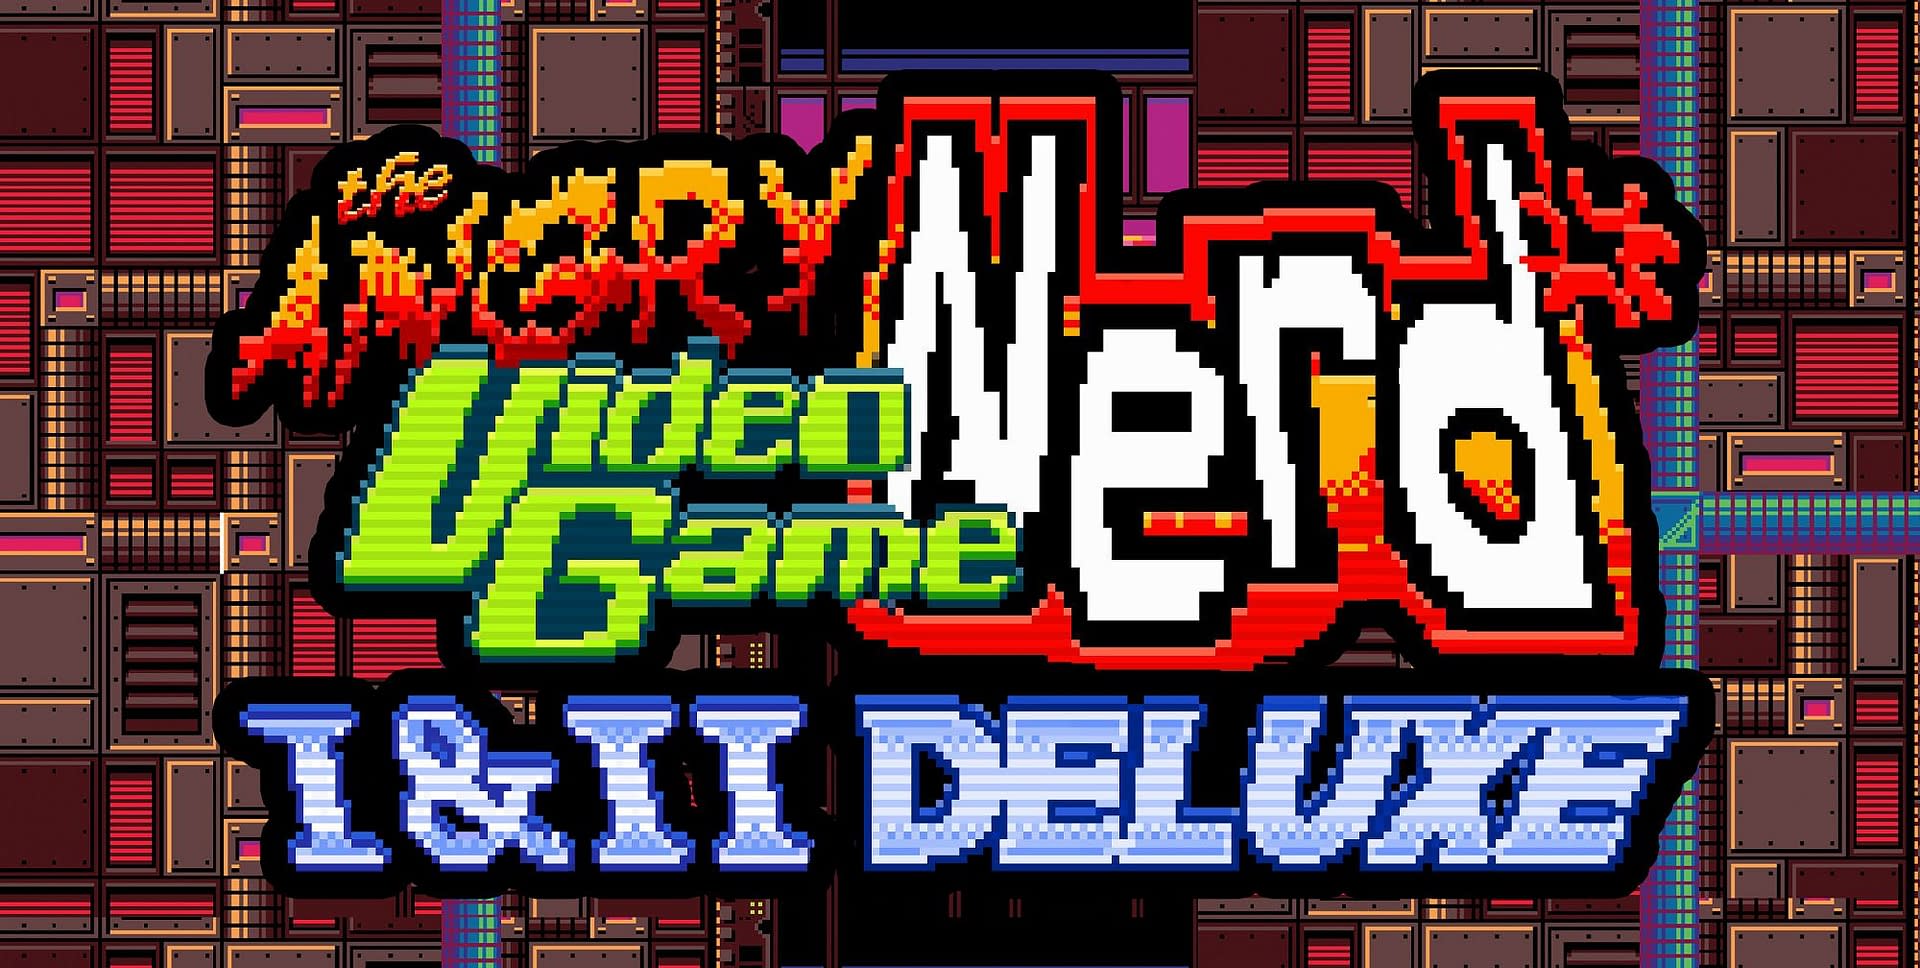 Screenwave Media Announces Angry Video Game Nerd 1 & 2 Deluxe